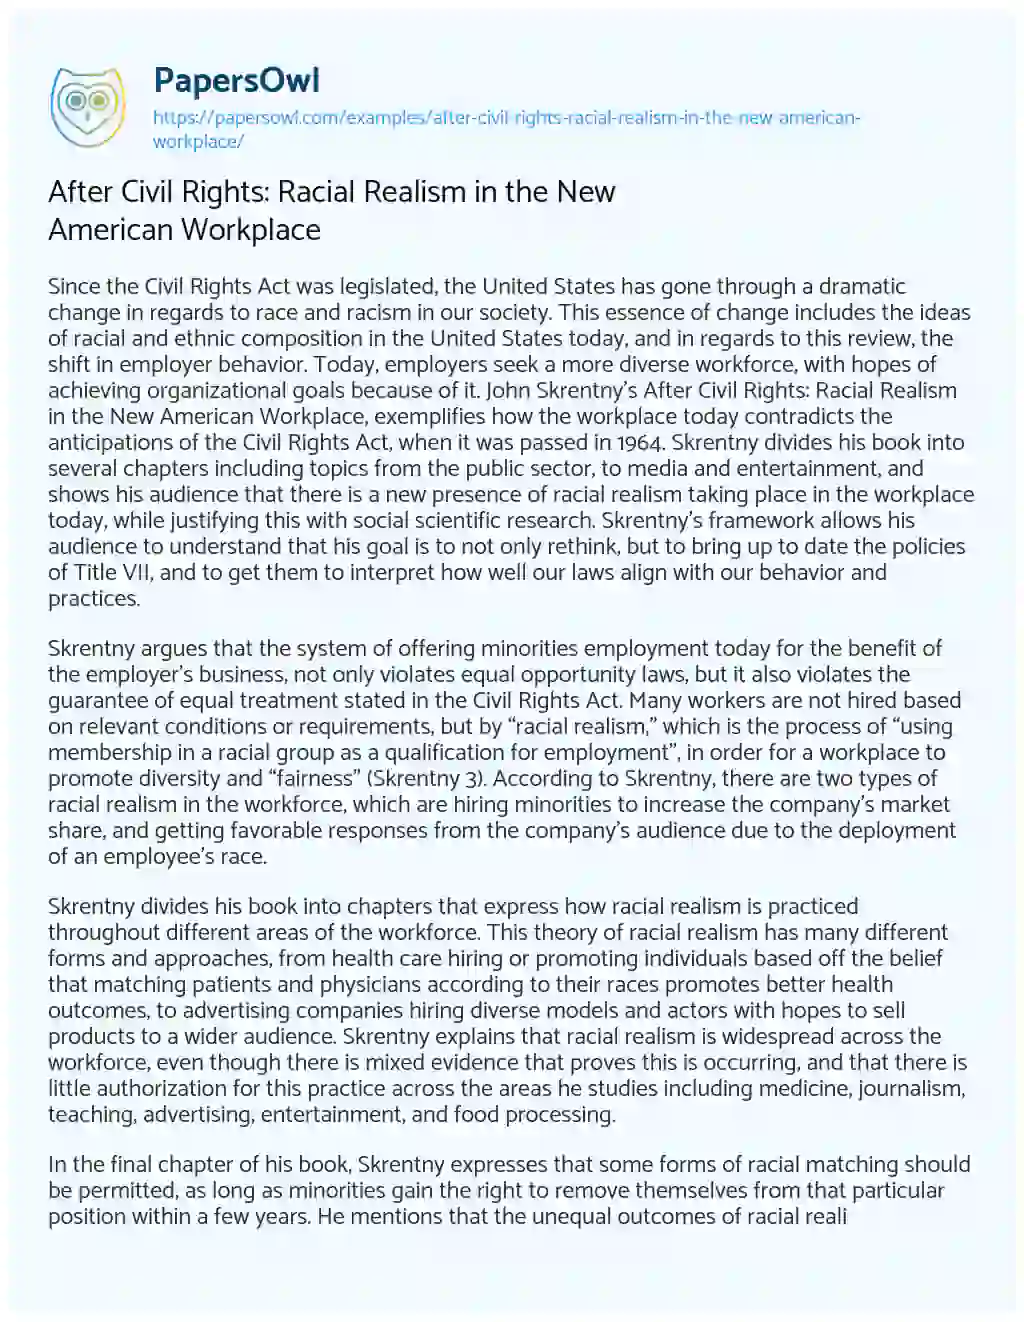 Essay on After Civil Rights: Racial Realism in the New American Workplace